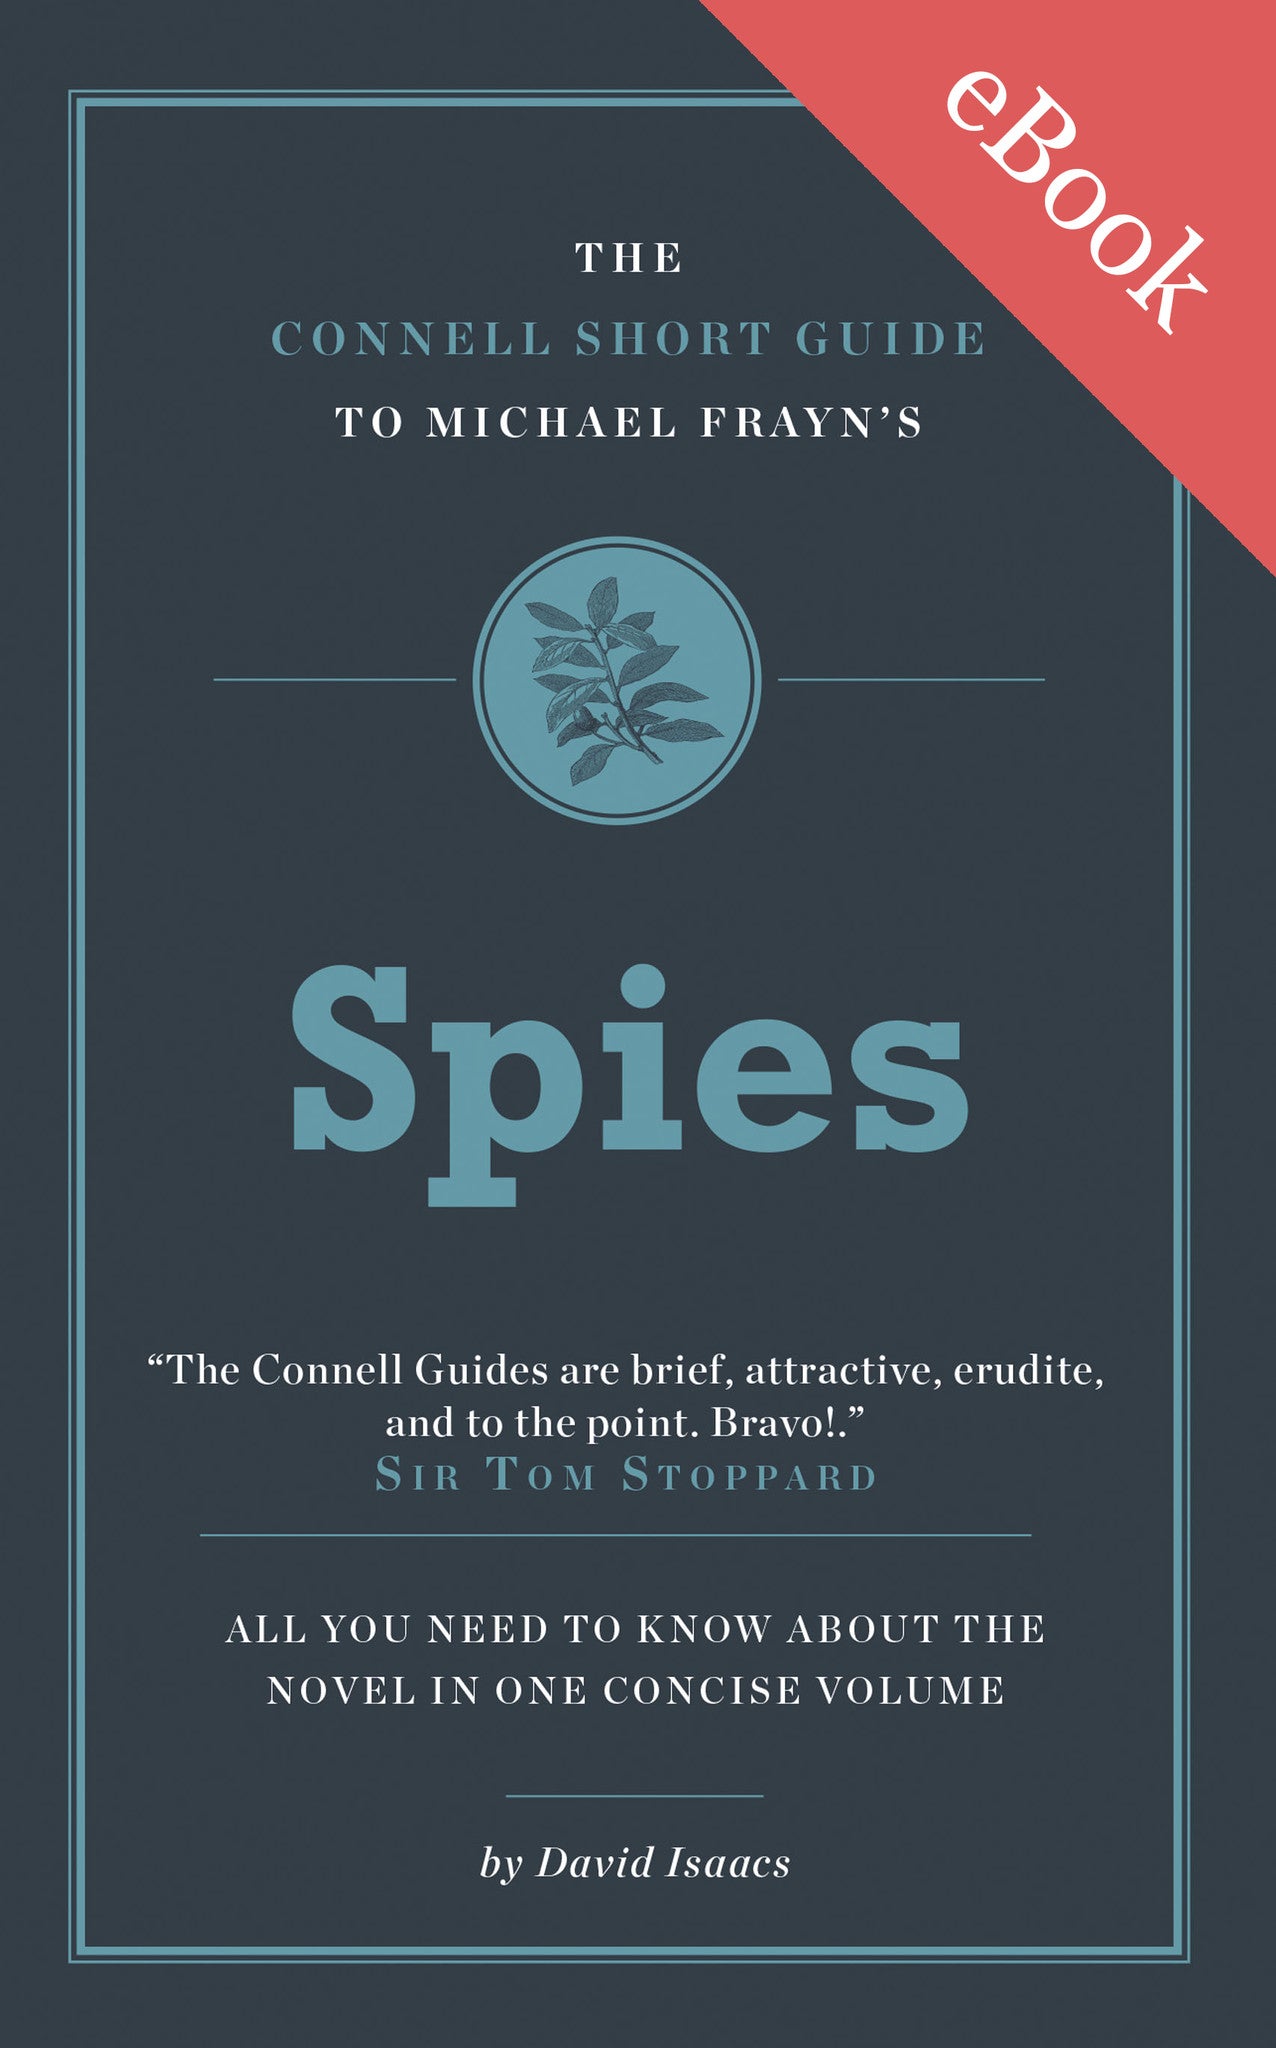 Michael Frayn’s Spies Short Study Guide